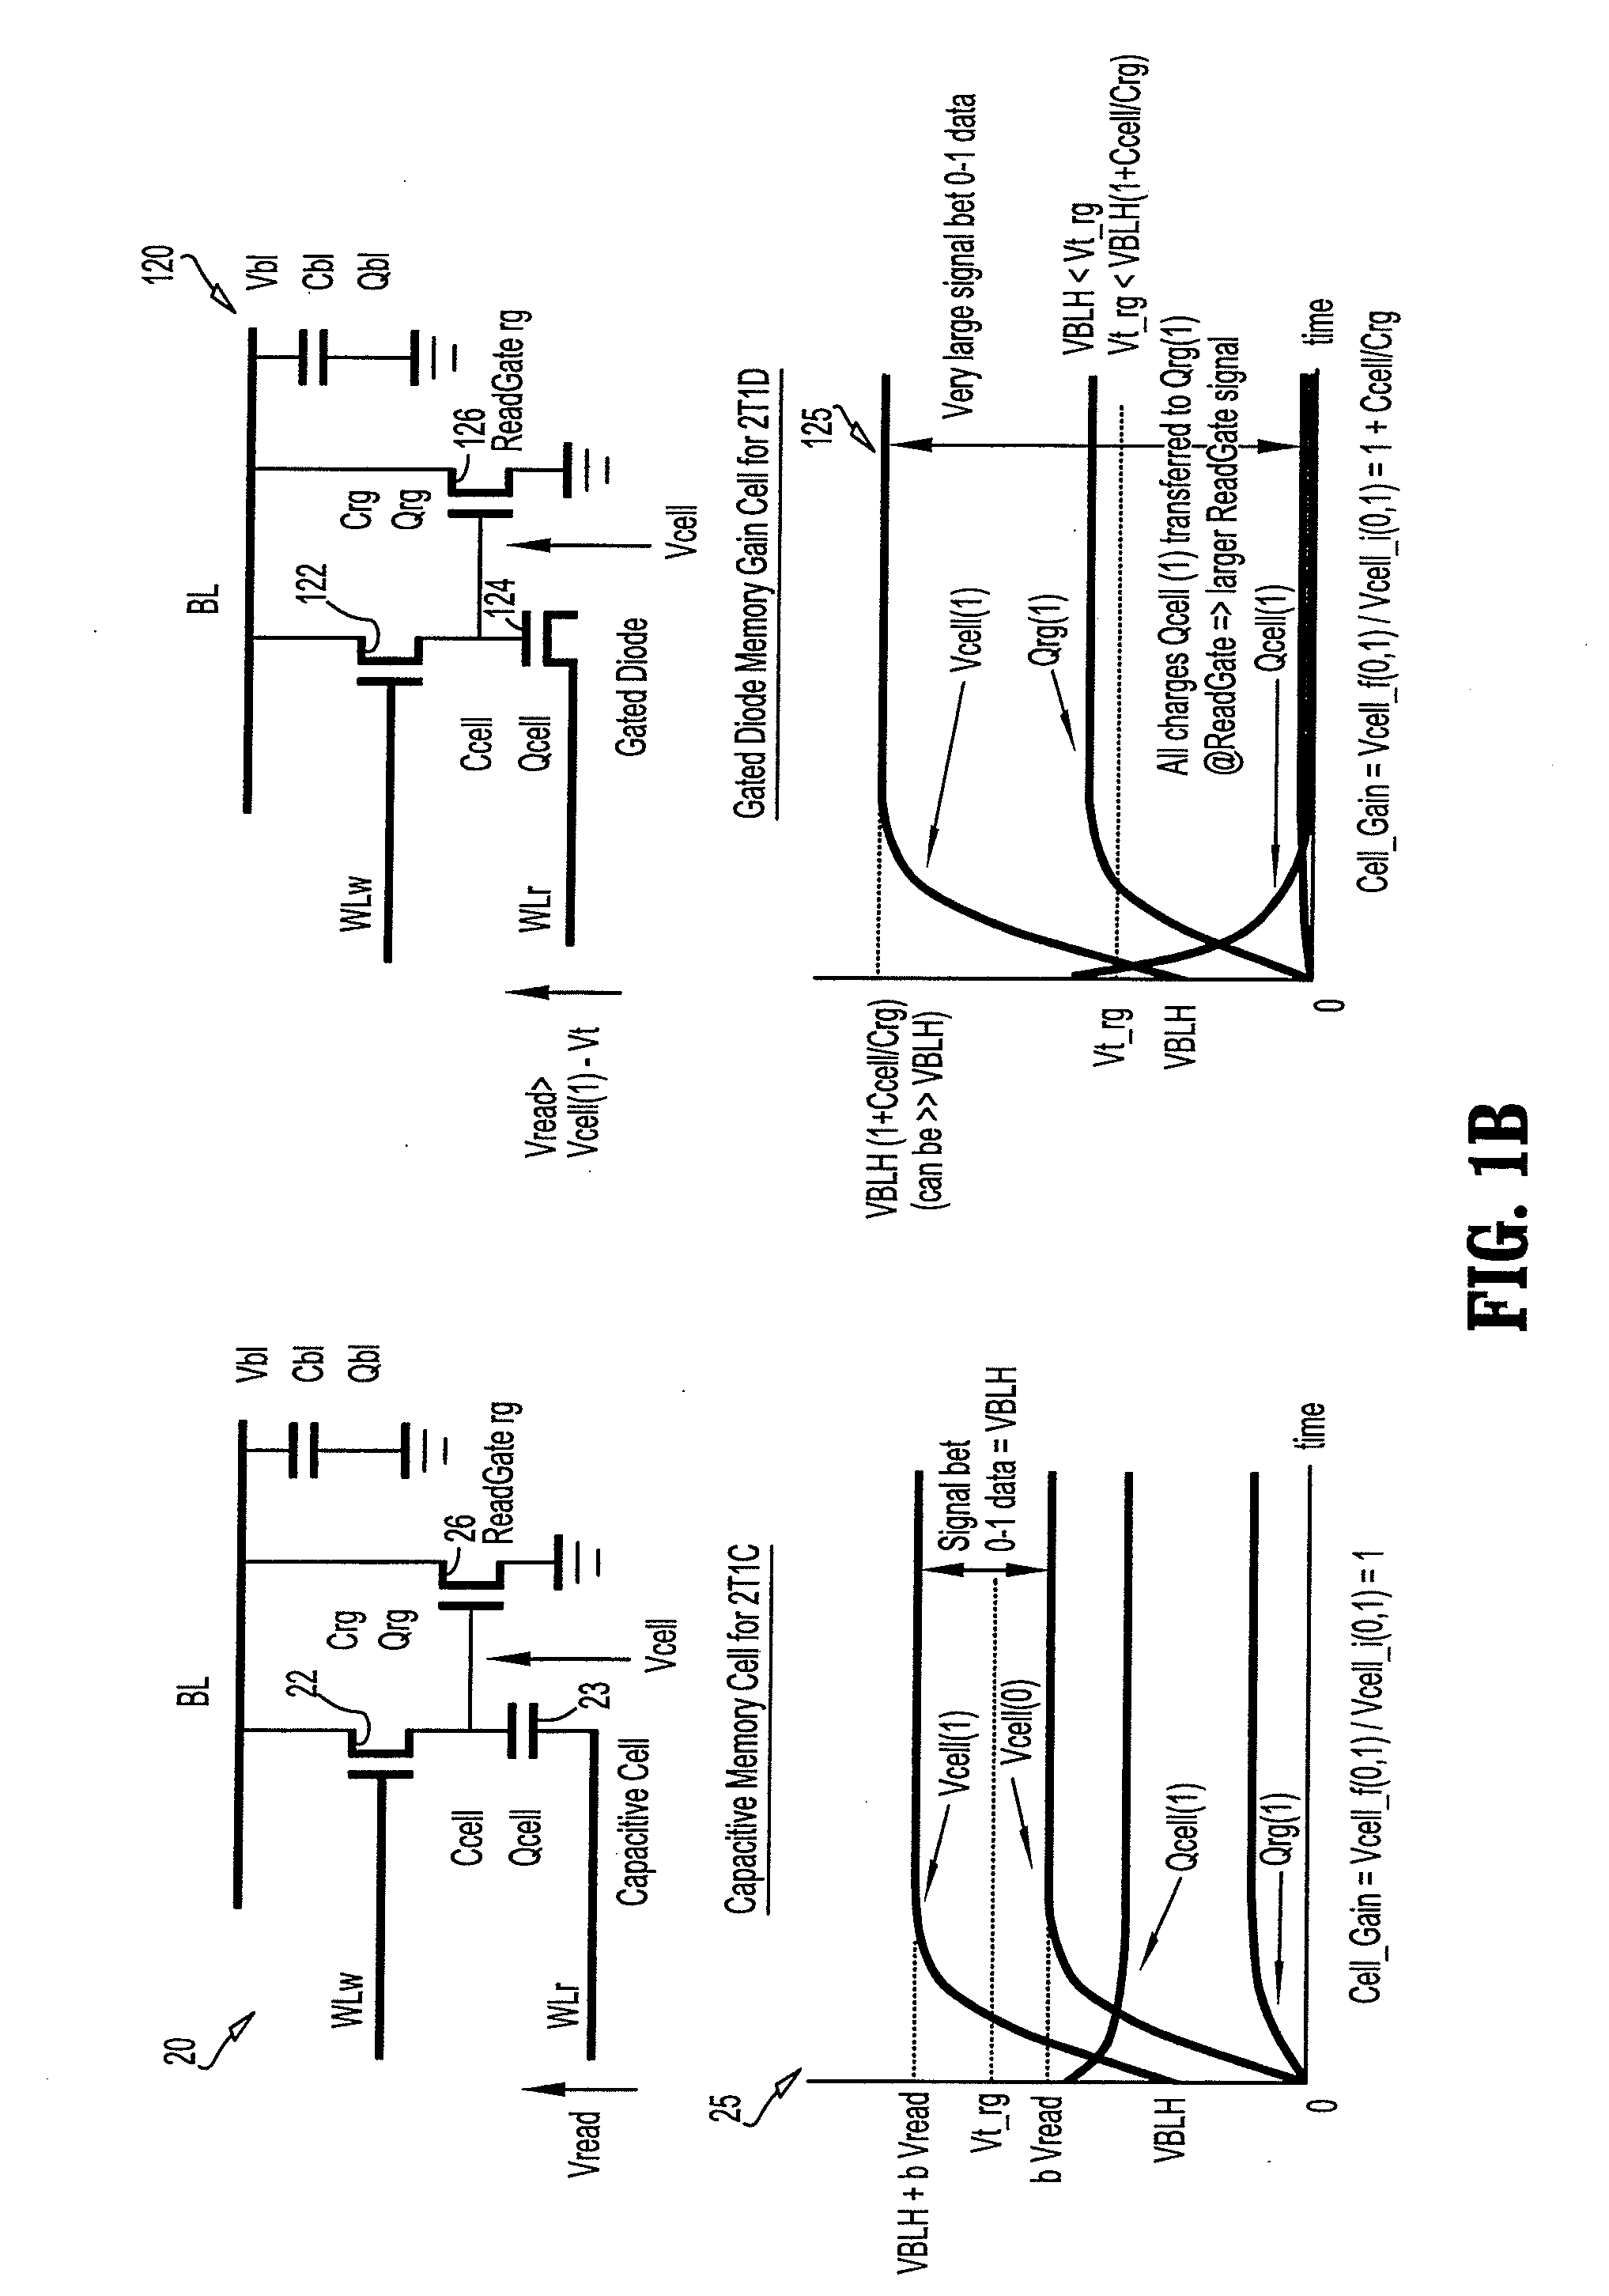 Gated Diode Memory Cells